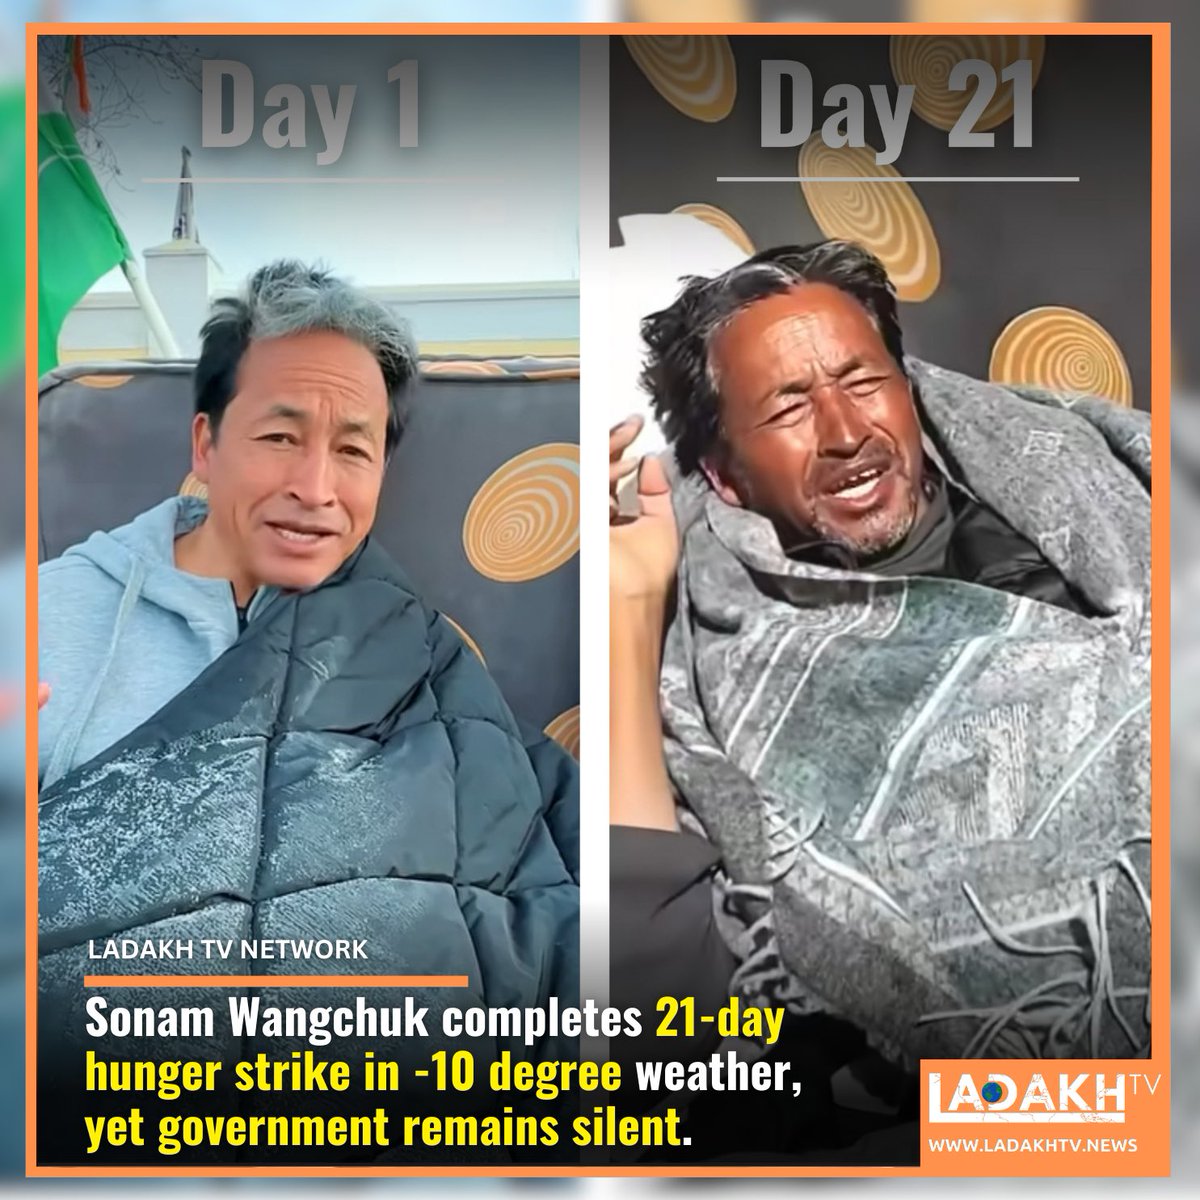 After completing a grueling 21-day hunger strike amidst -10 degree weather, @Wangchuk66 plea for governmental attention remains unanswered. In response, sources indicate that the women of Ladakh are gearing up for a 10-day hunger strike, highlighting the urgency of their cause.